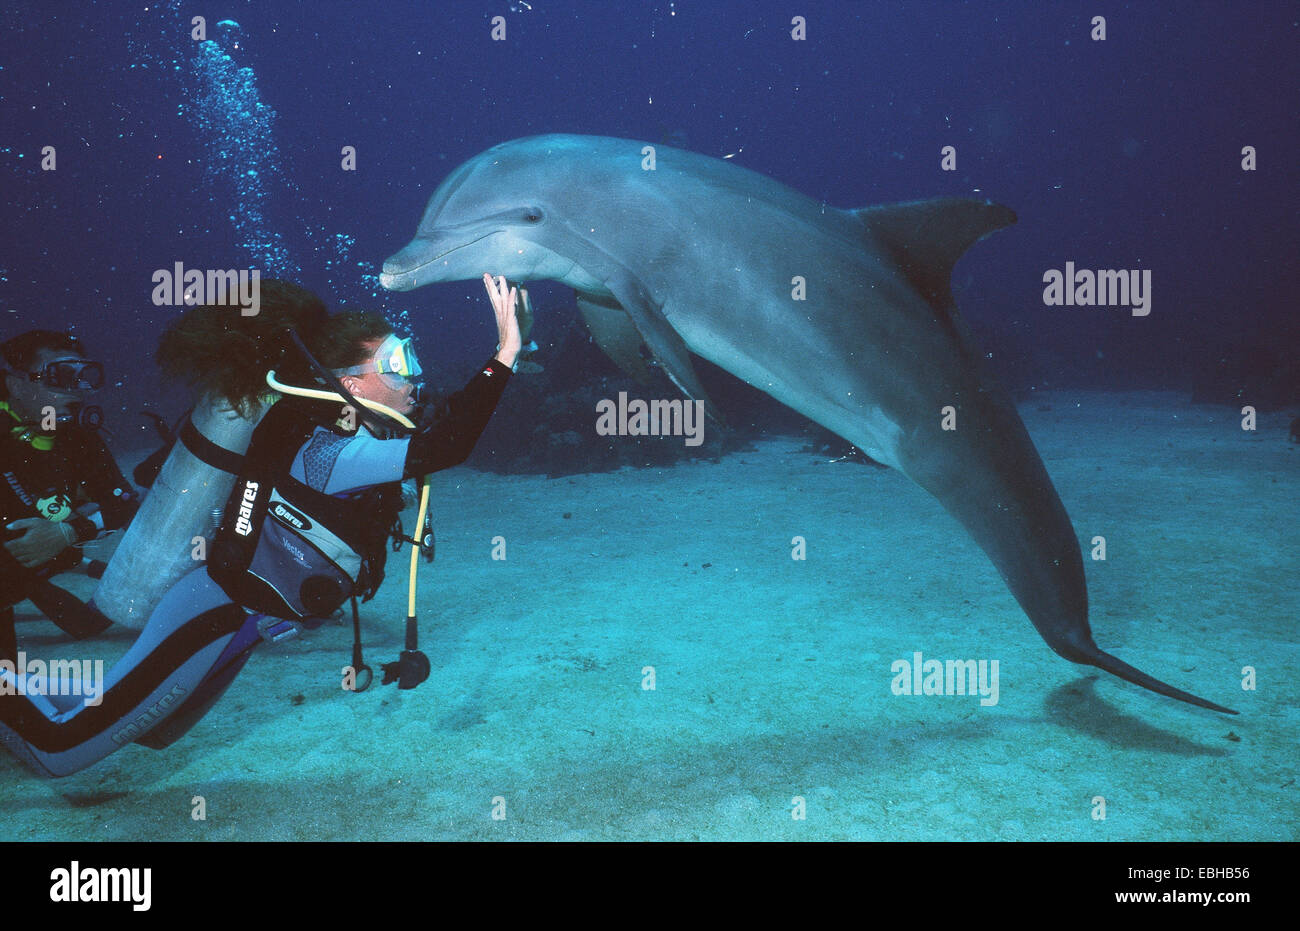 bottlenosed dolphin, common bottle-nosed dolphin (Tursiops truncatus), with diver. Stock Photo